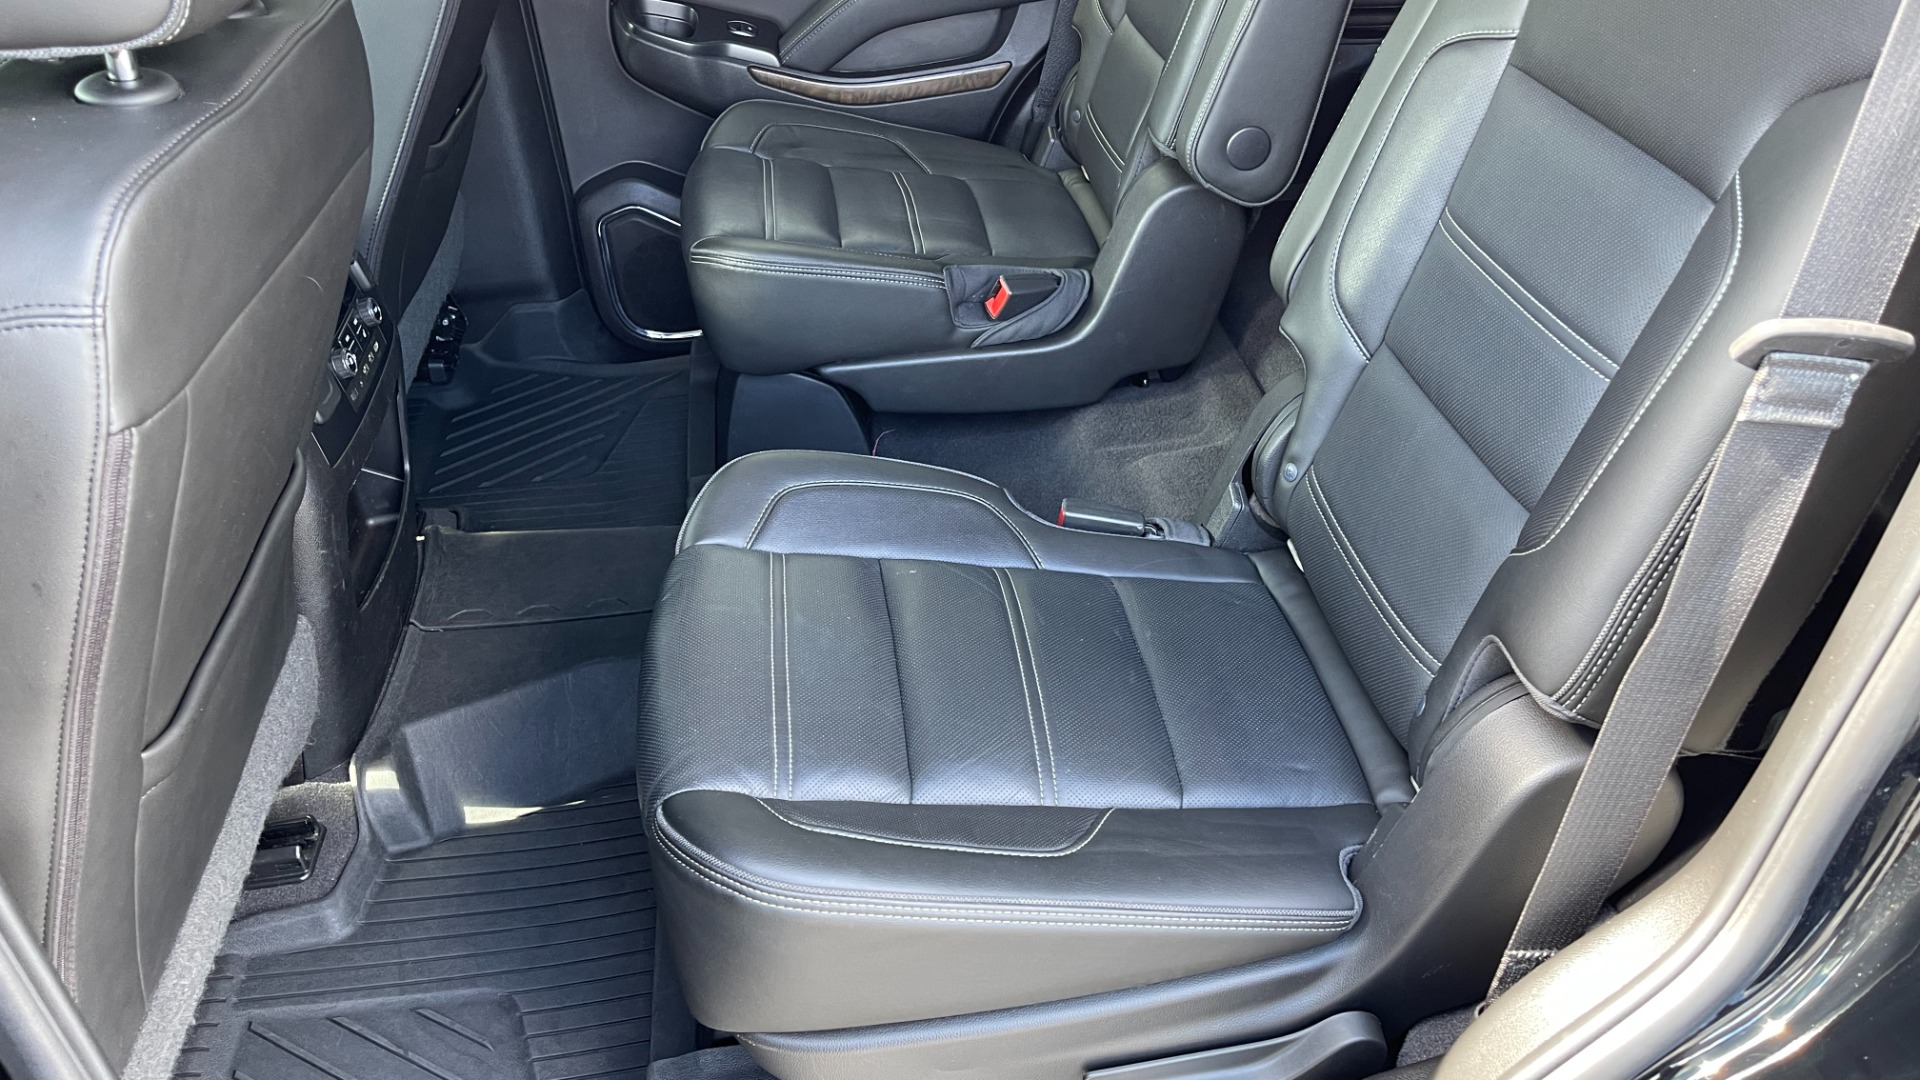 Used 2019 GMC Yukon DENALI / ULTIMATE PACKAGE / DVD / 4X4 / ADAPTIVE CRUISE / SUNROOF for sale $58,295 at Formula Imports in Charlotte NC 28227 20